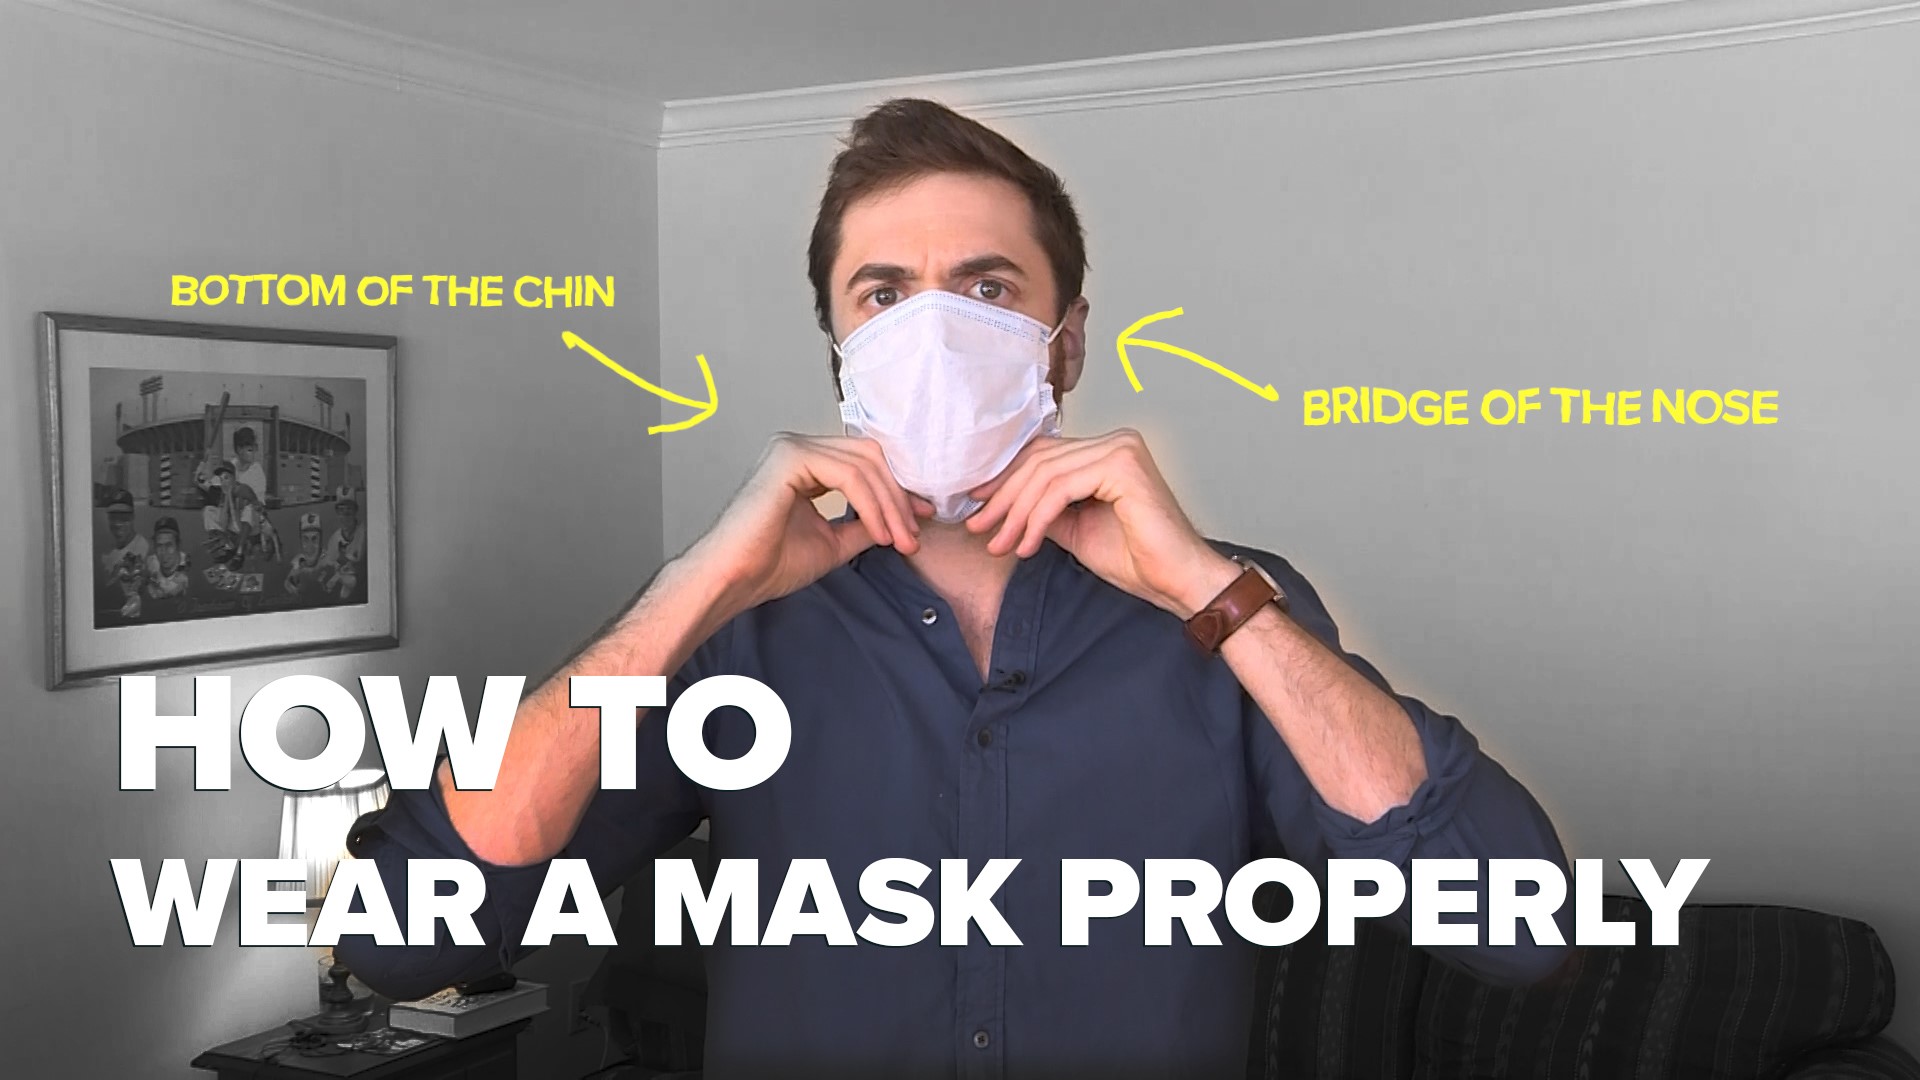 A face mask won't protect you from the coronavirus if you're not wearing it correctly. Here are some tips to make sure it's doing its job.